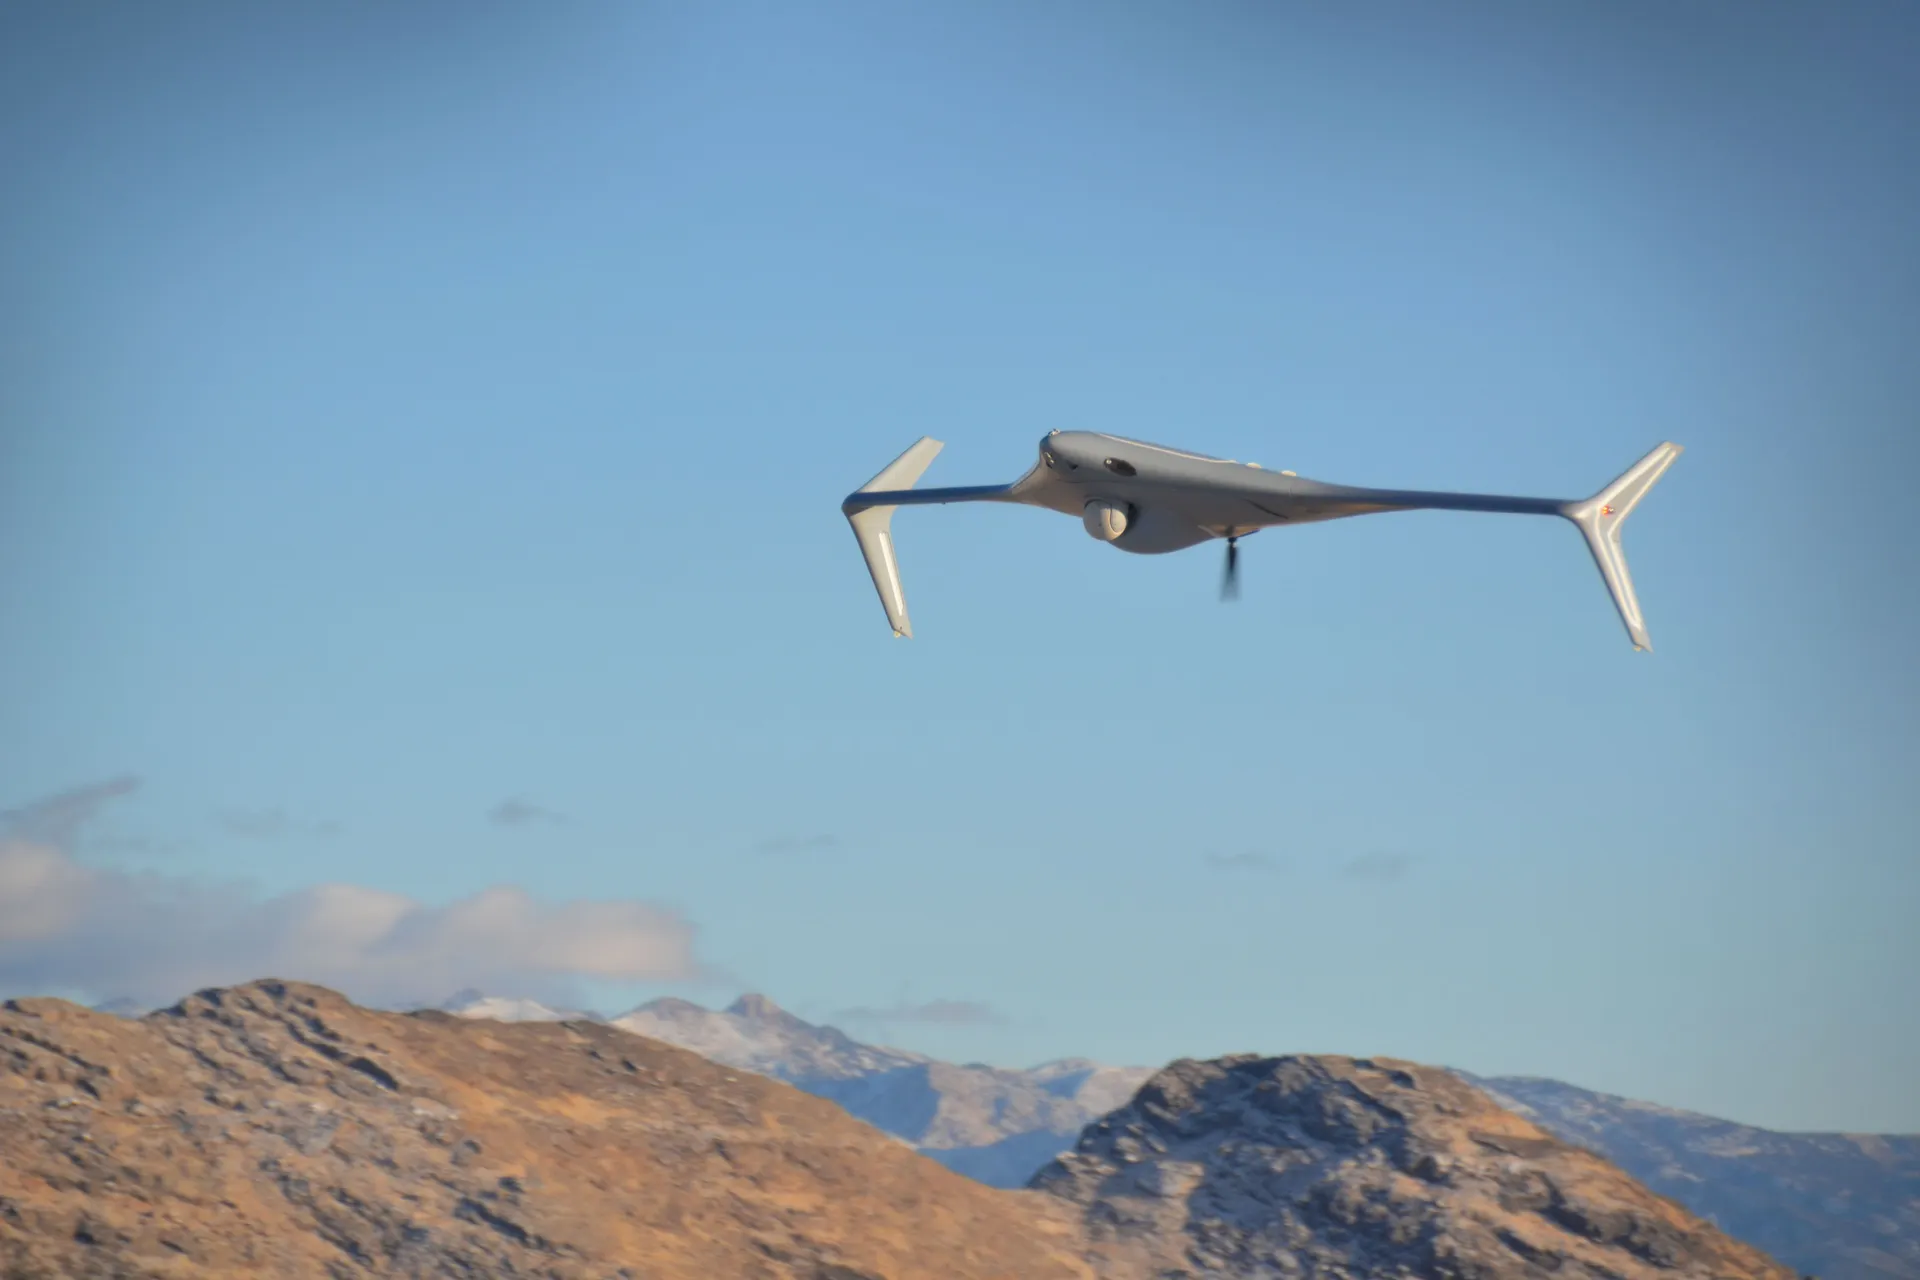 Northrop_launched drone BAT